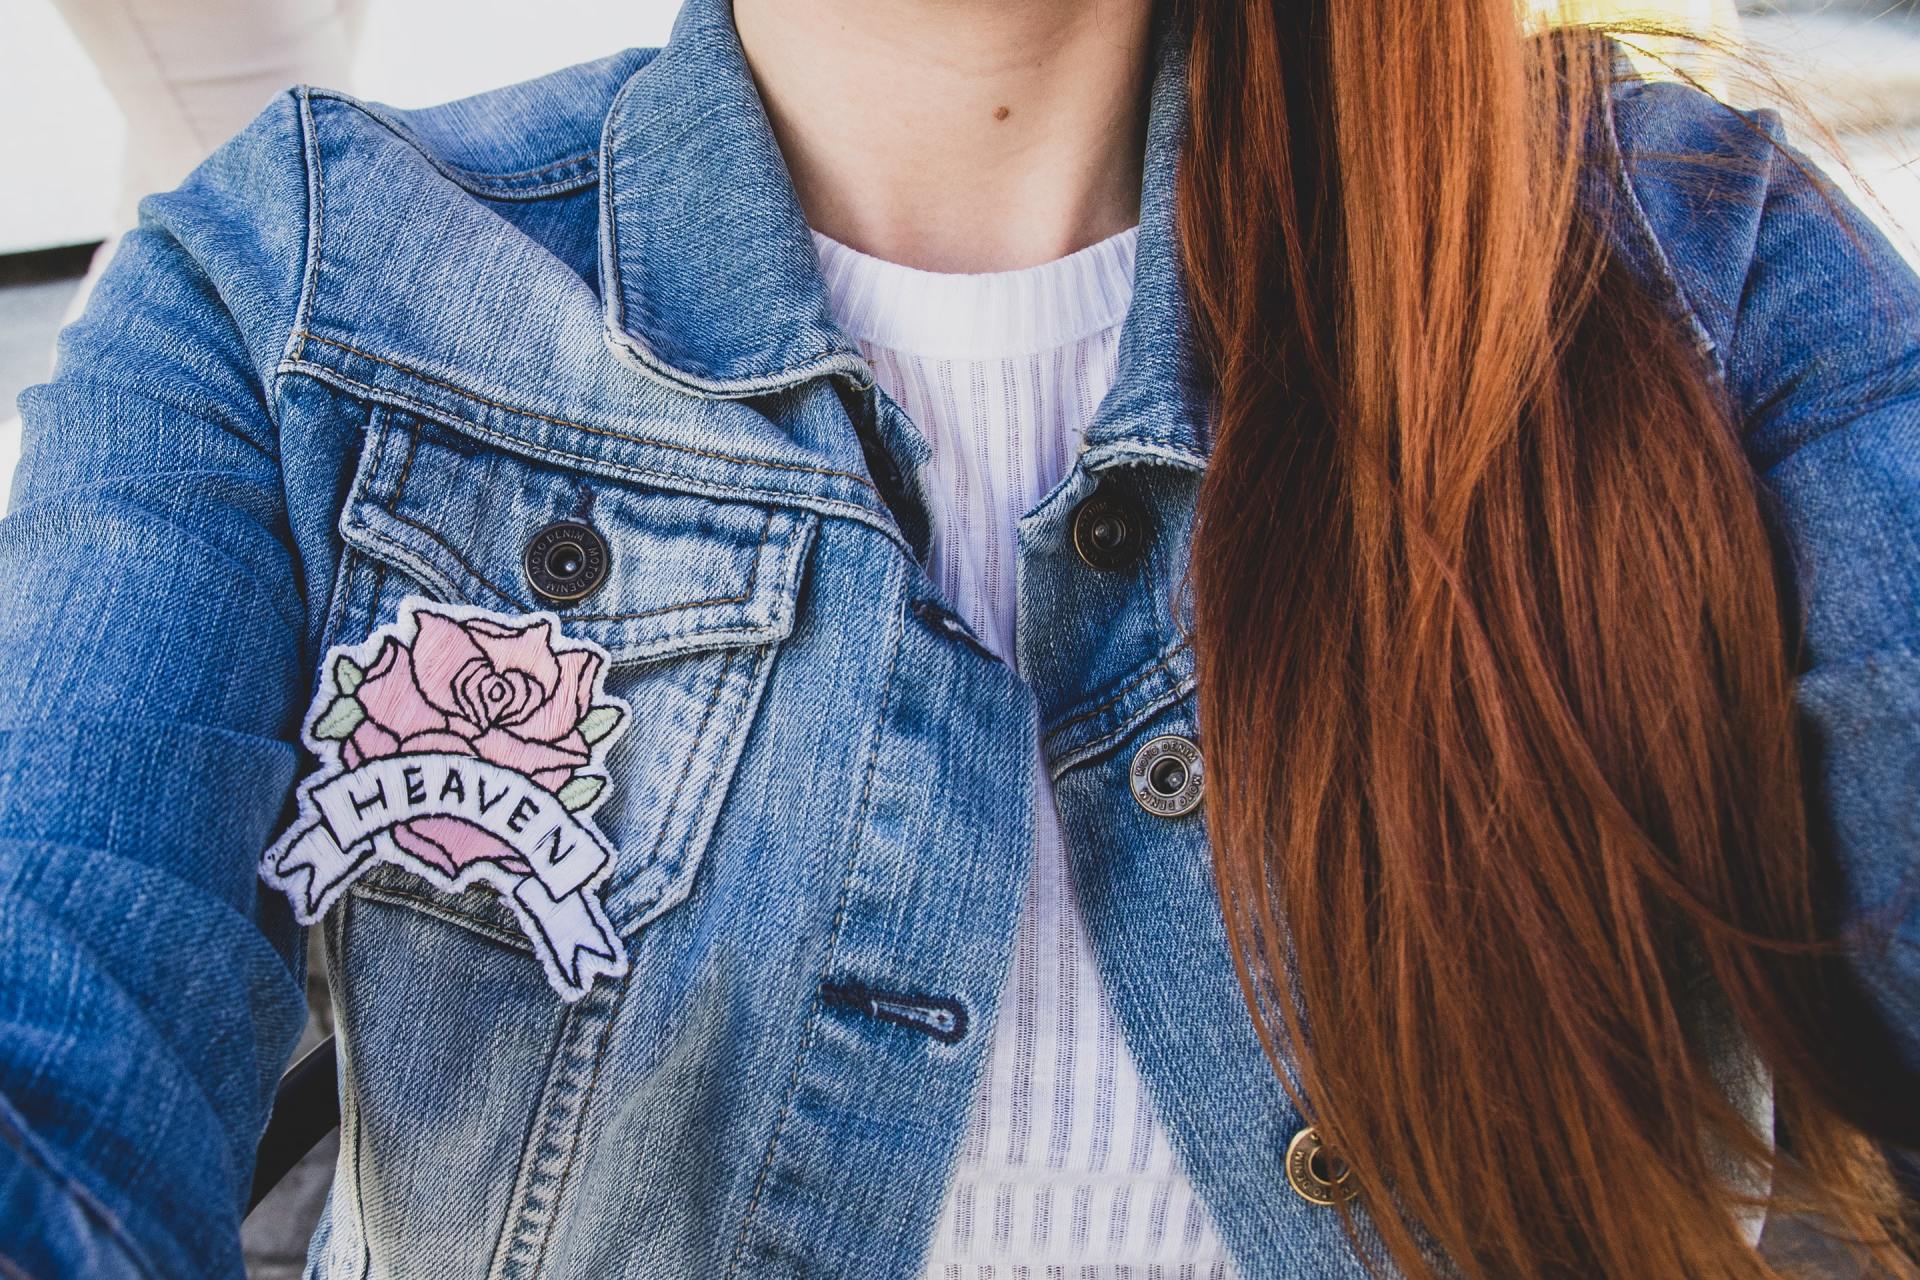 A woman is wearing a denim jacket with a patch on it.